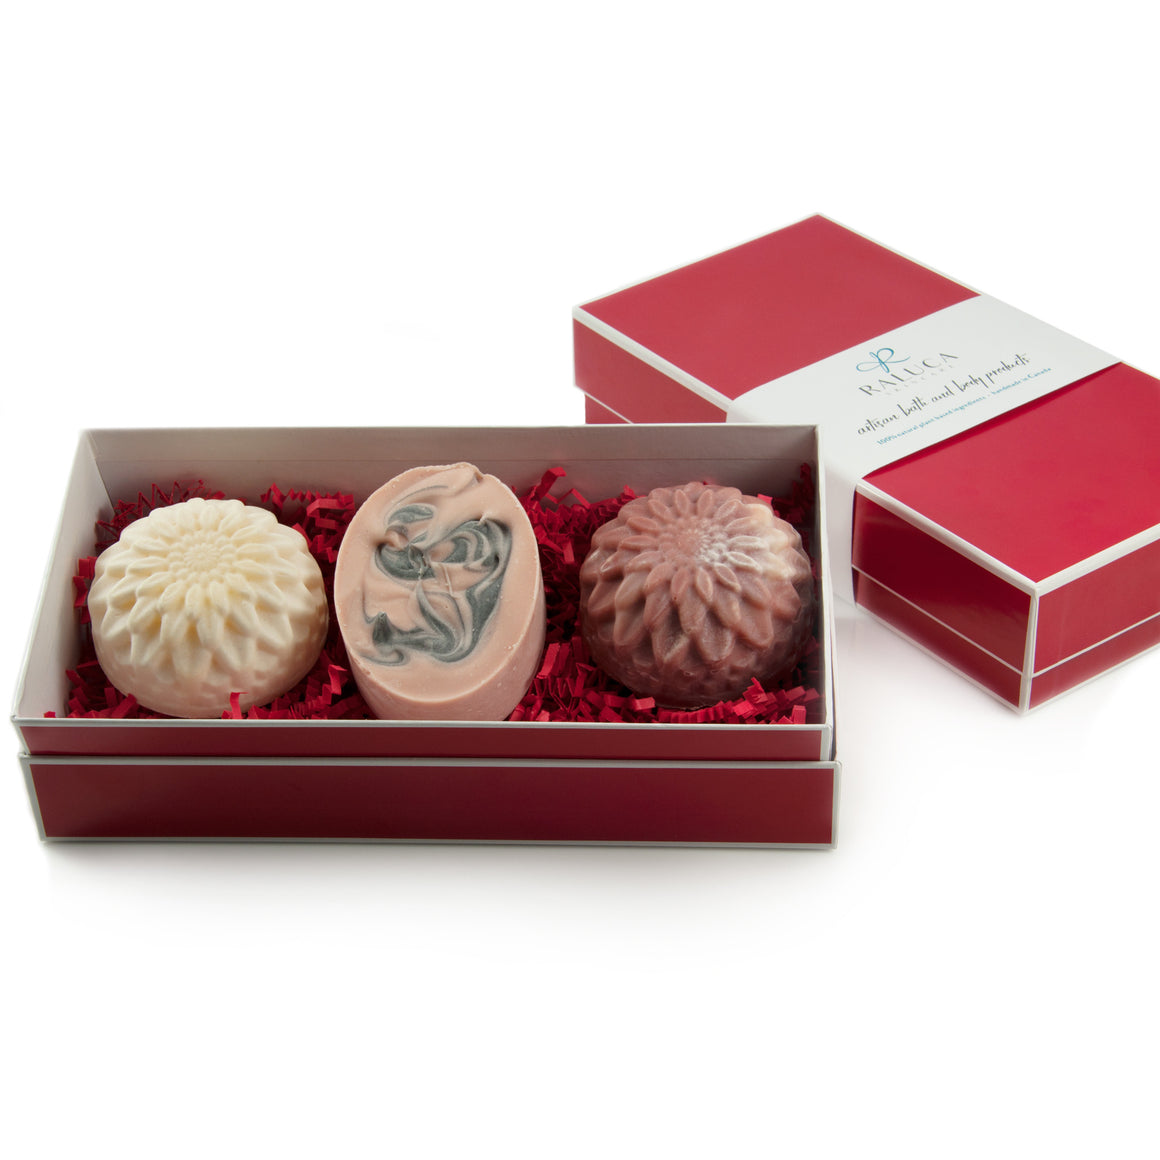 Raluca Skincare - Artisan soap set - pink and white flower shaped soaps